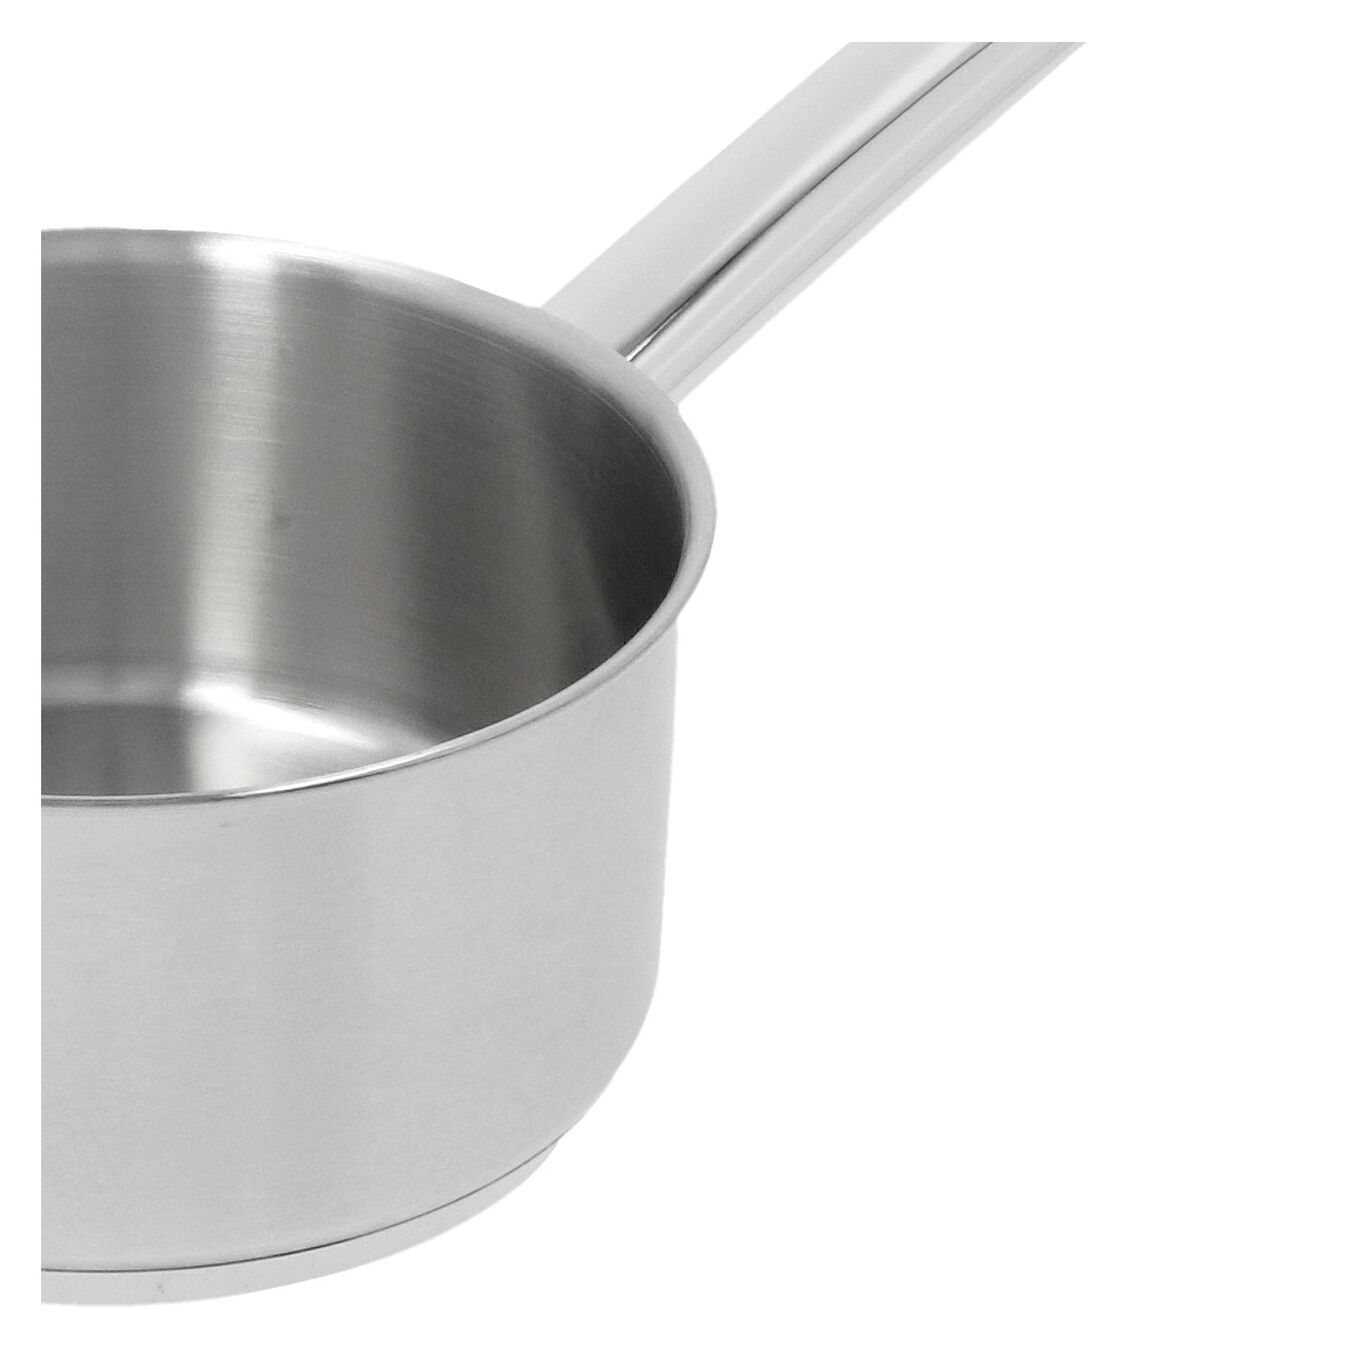 14 cm 18/10 Stainless Steel Saucepan with lid silver,,large 4